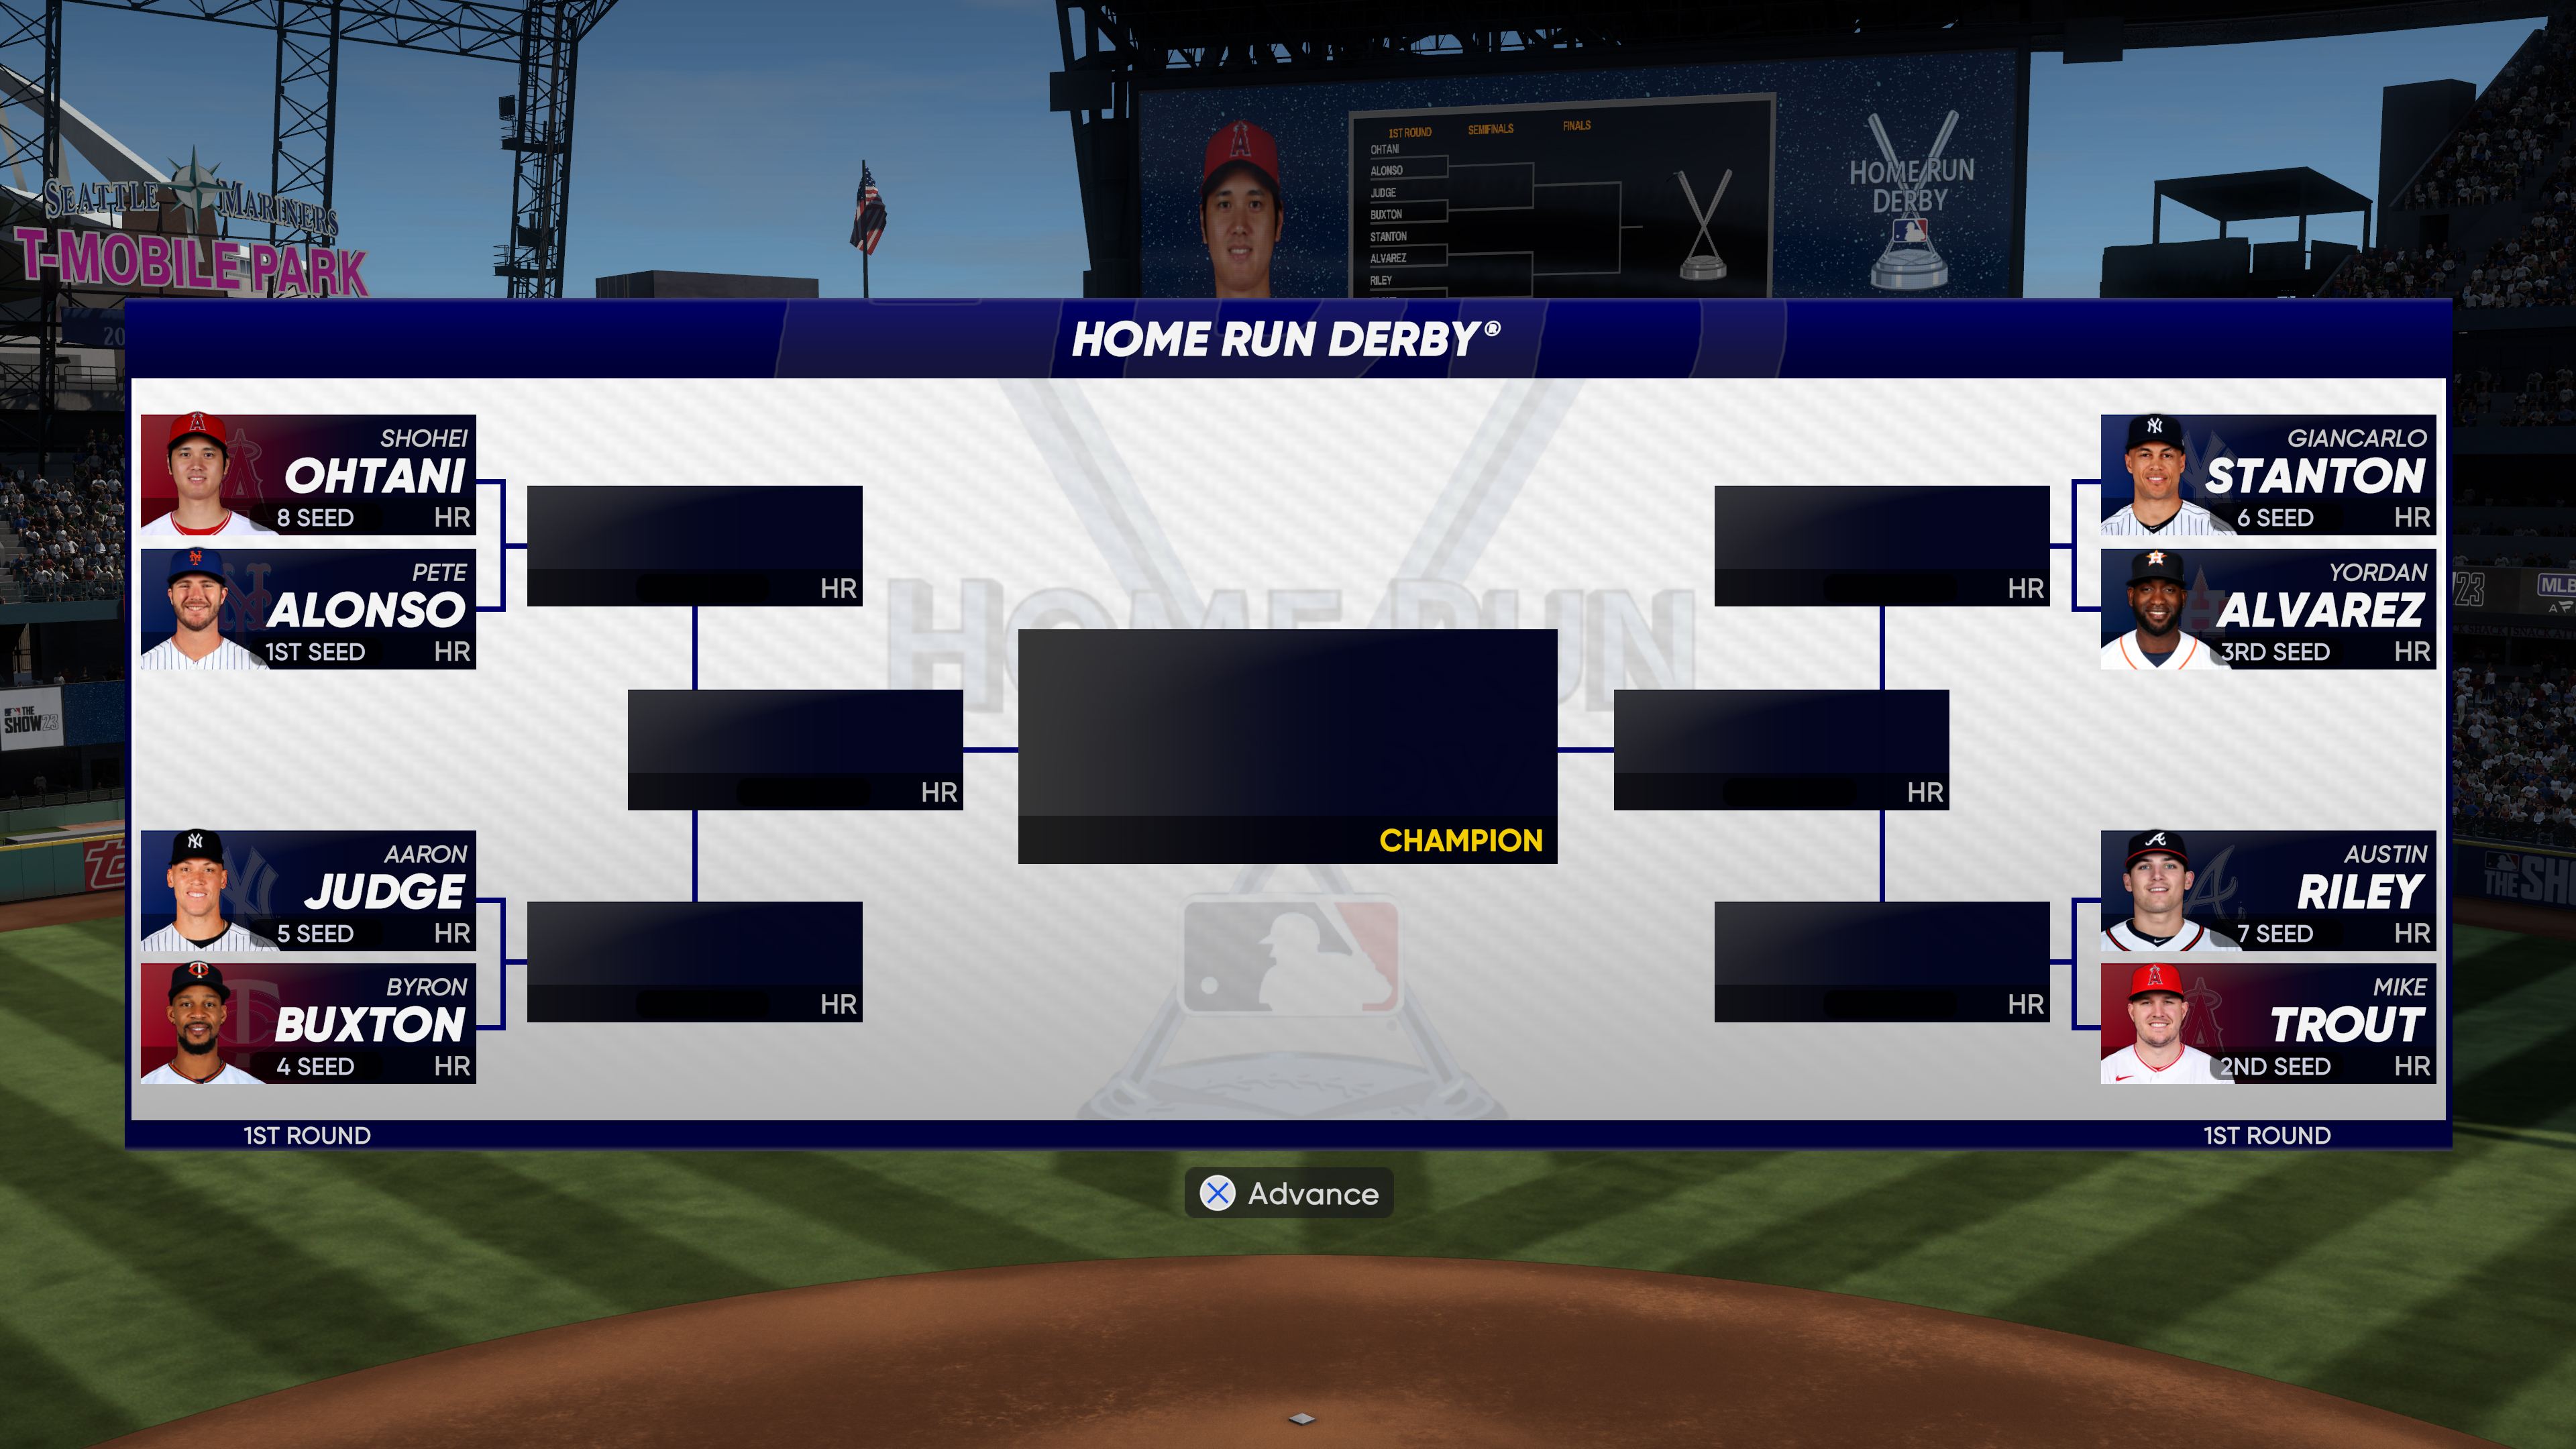 More ways to play home run derby